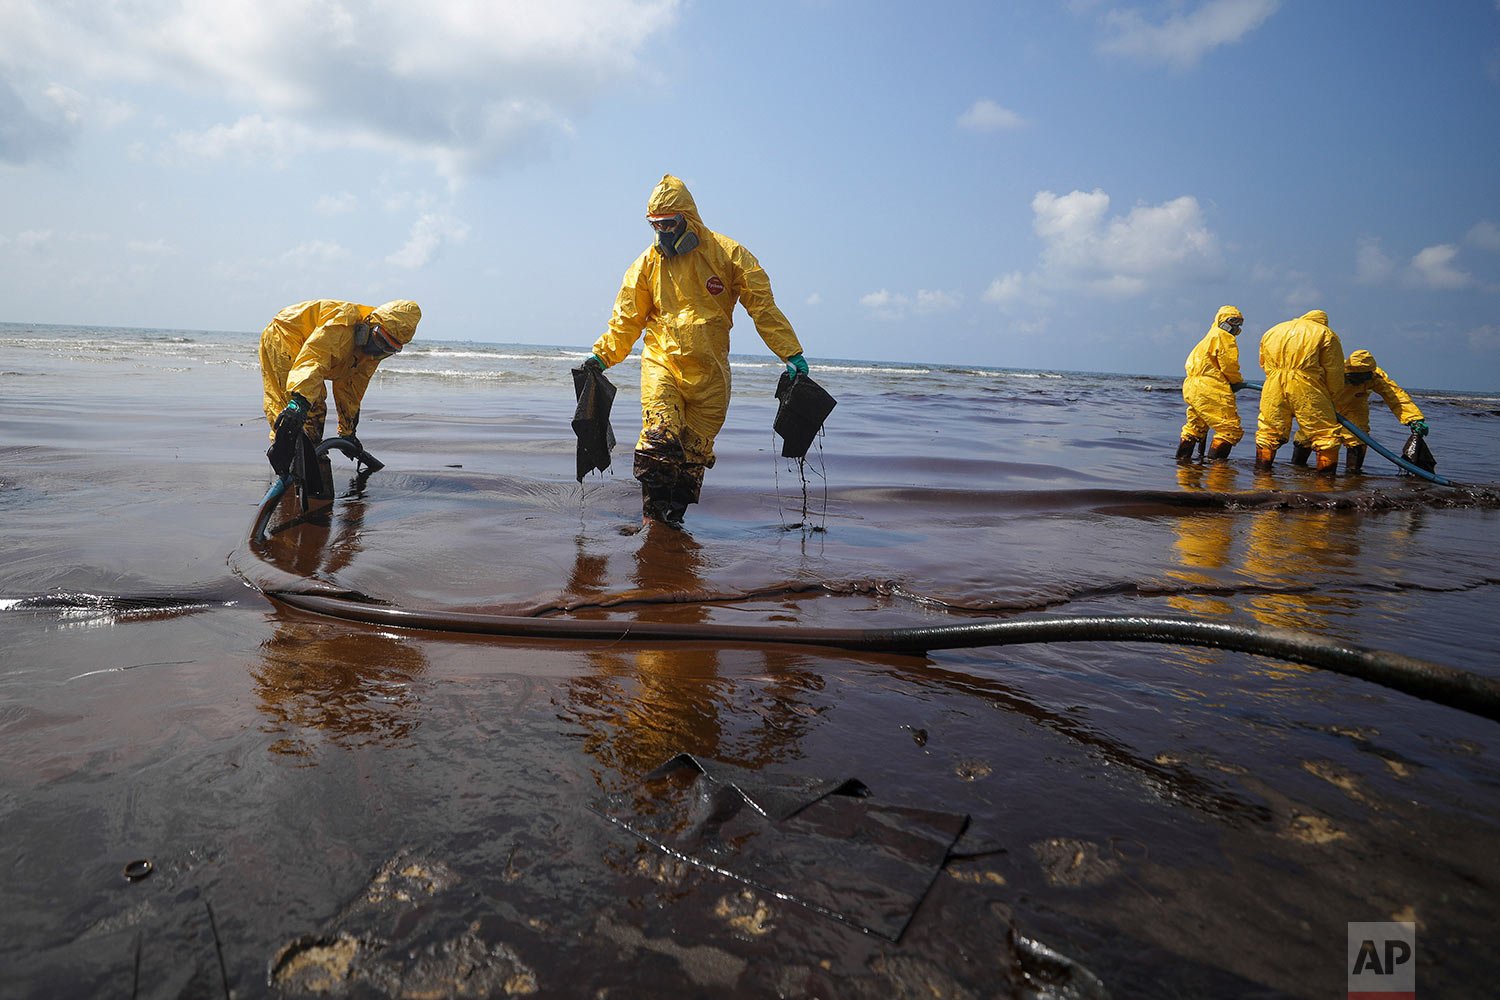  Workers carry out a clean-up operation on Mae Ramphueng Beach after a pipeline oil spill off the coast of Rayong province in eastern Thailand, Saturday, Jan. 29, 2022. (AP Photo/Nava Sangthong) 